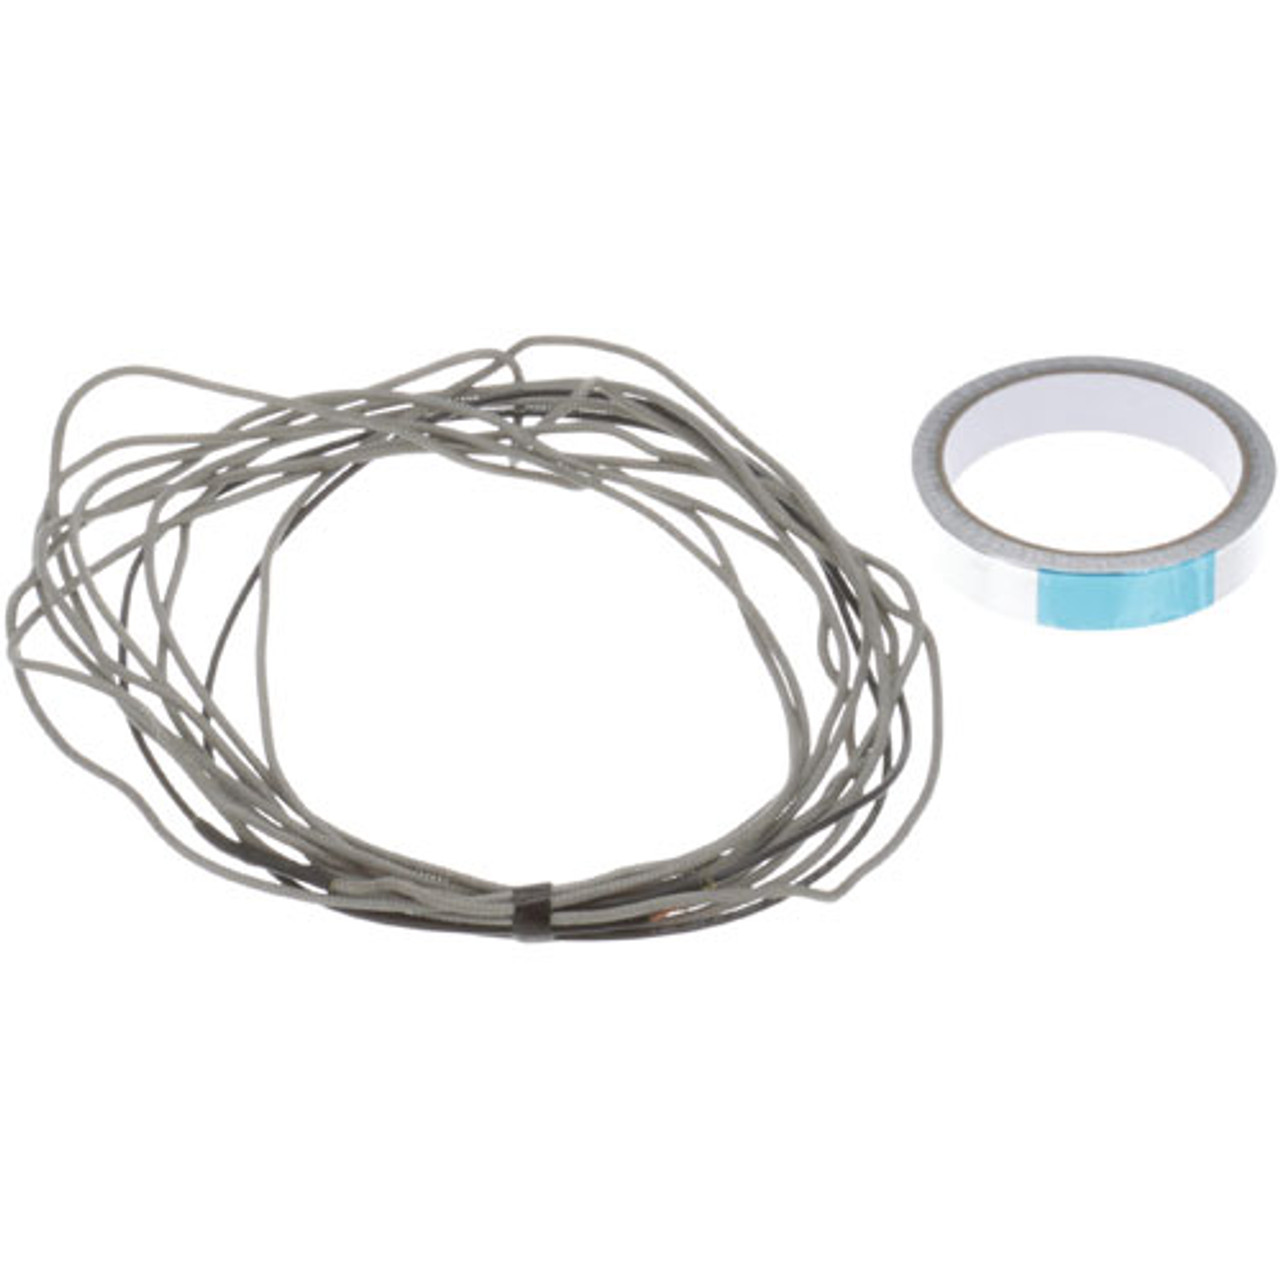 Heater Wire Kit - Replacement Part For Vollrath/Idea-Medalie 50000-0179